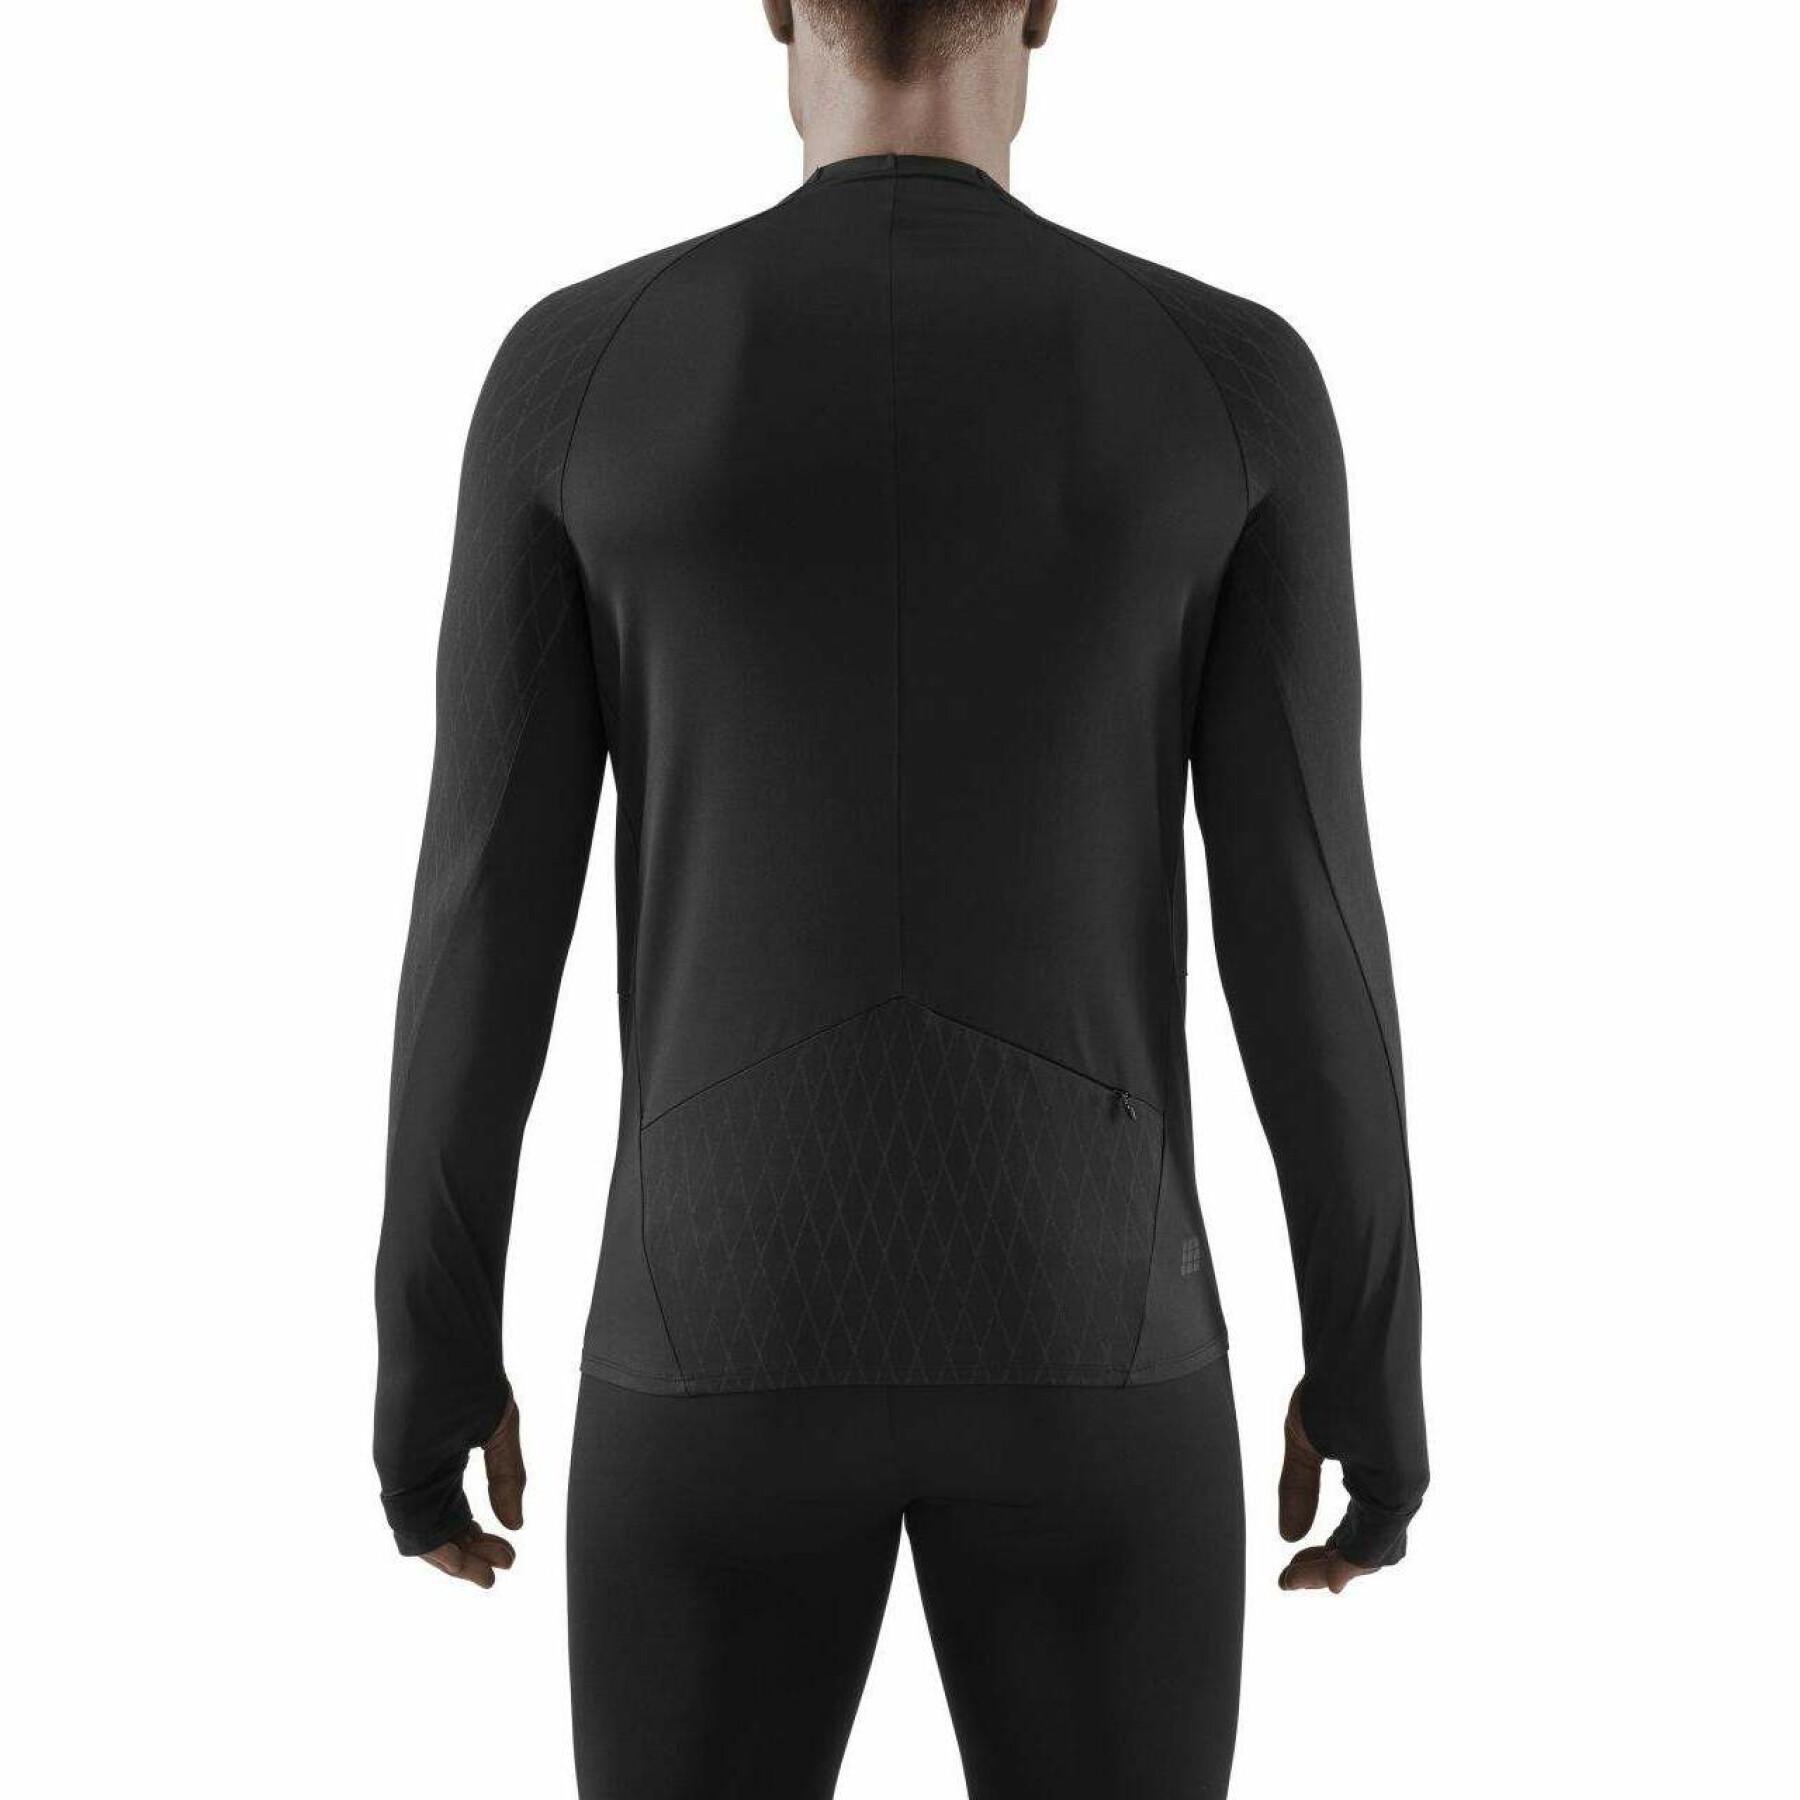 Long sleeve cold weather jersey CEP Compression